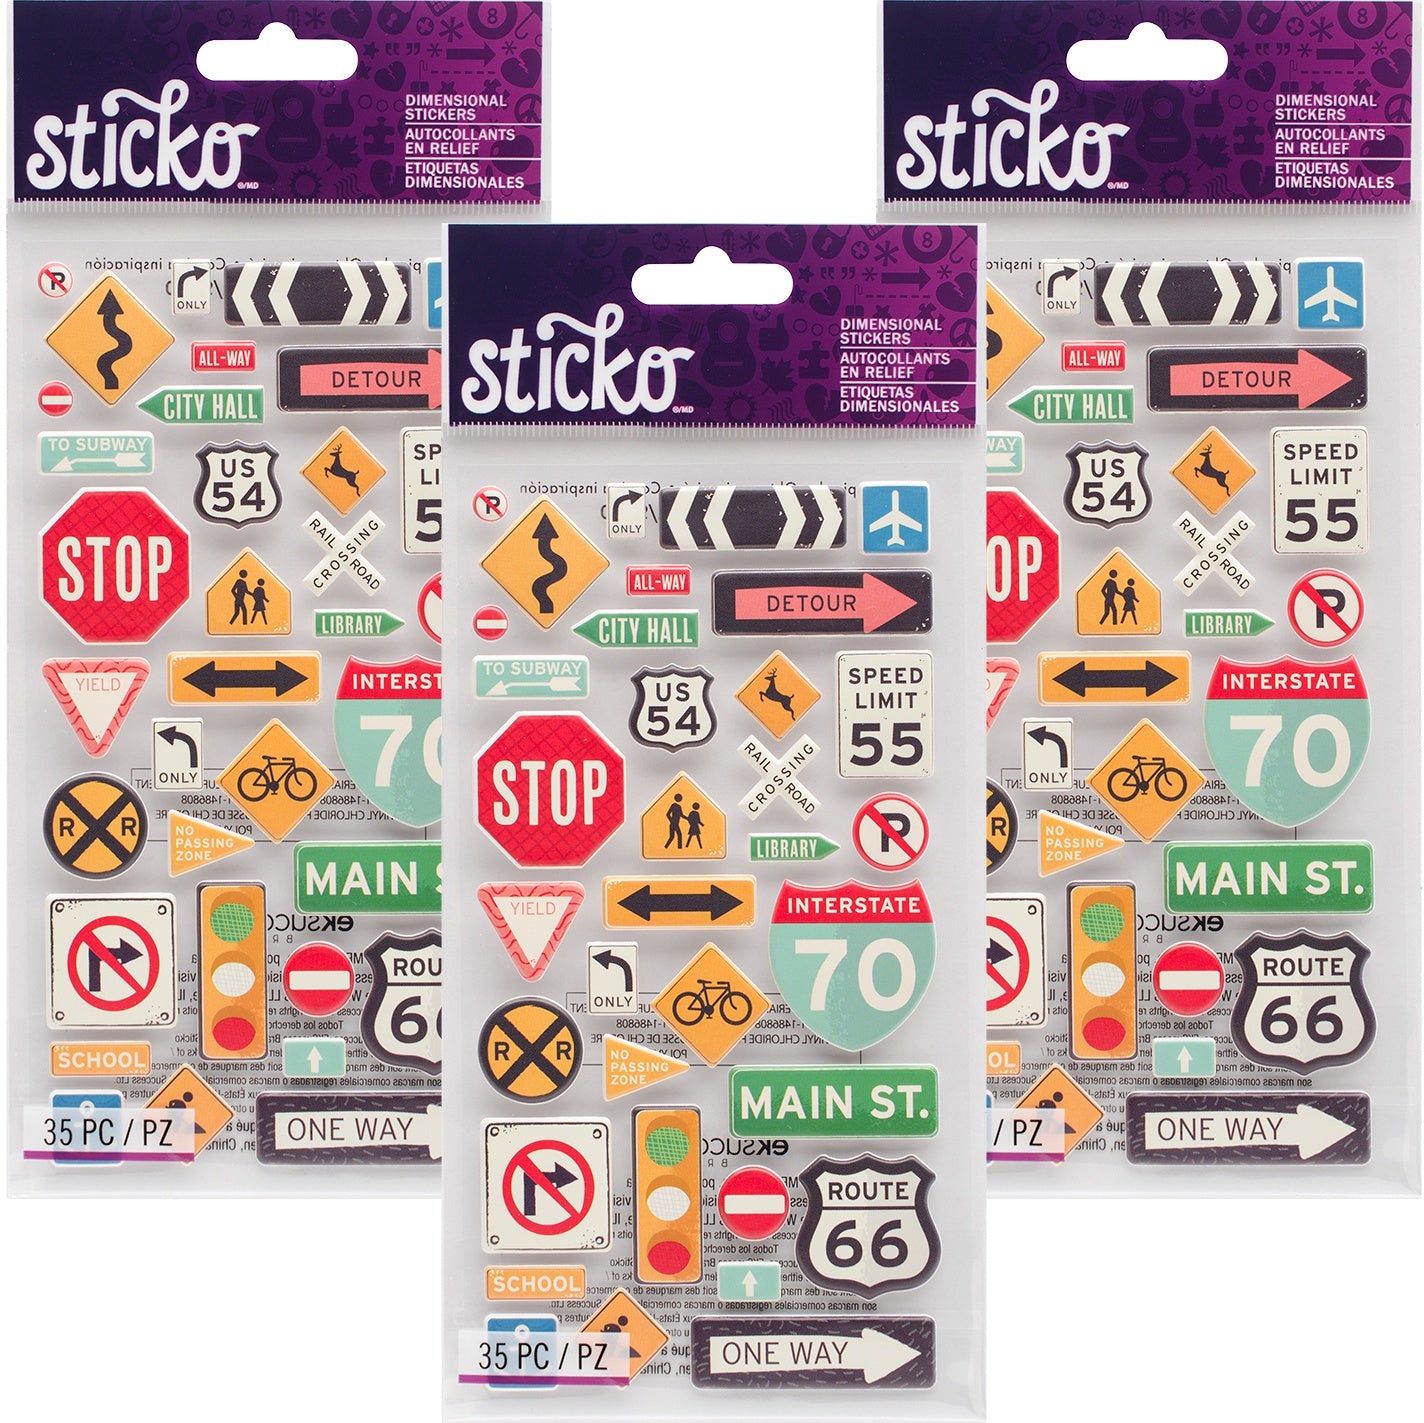 Multipack of 3 - Sticko Dimensional Stickers-Road Signs